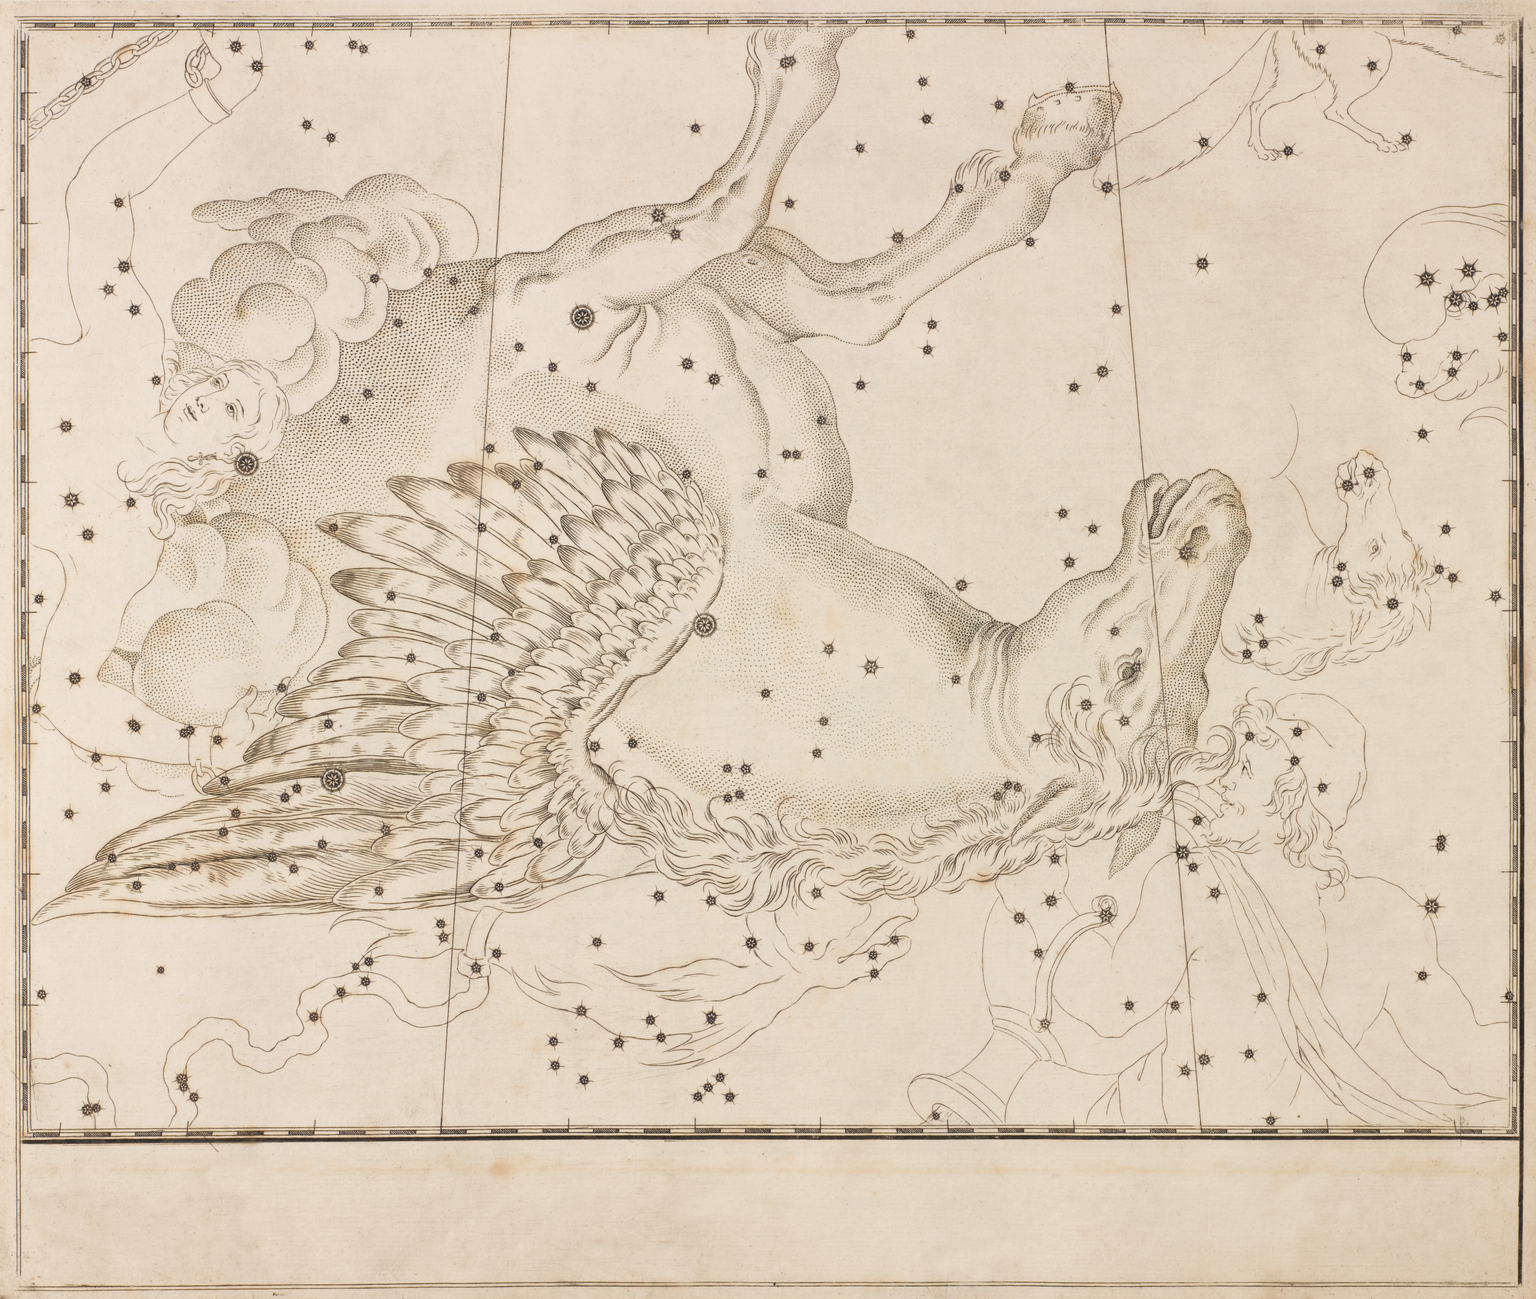 The constellation of Pegasus. By John Flamstead (Flamsteed).